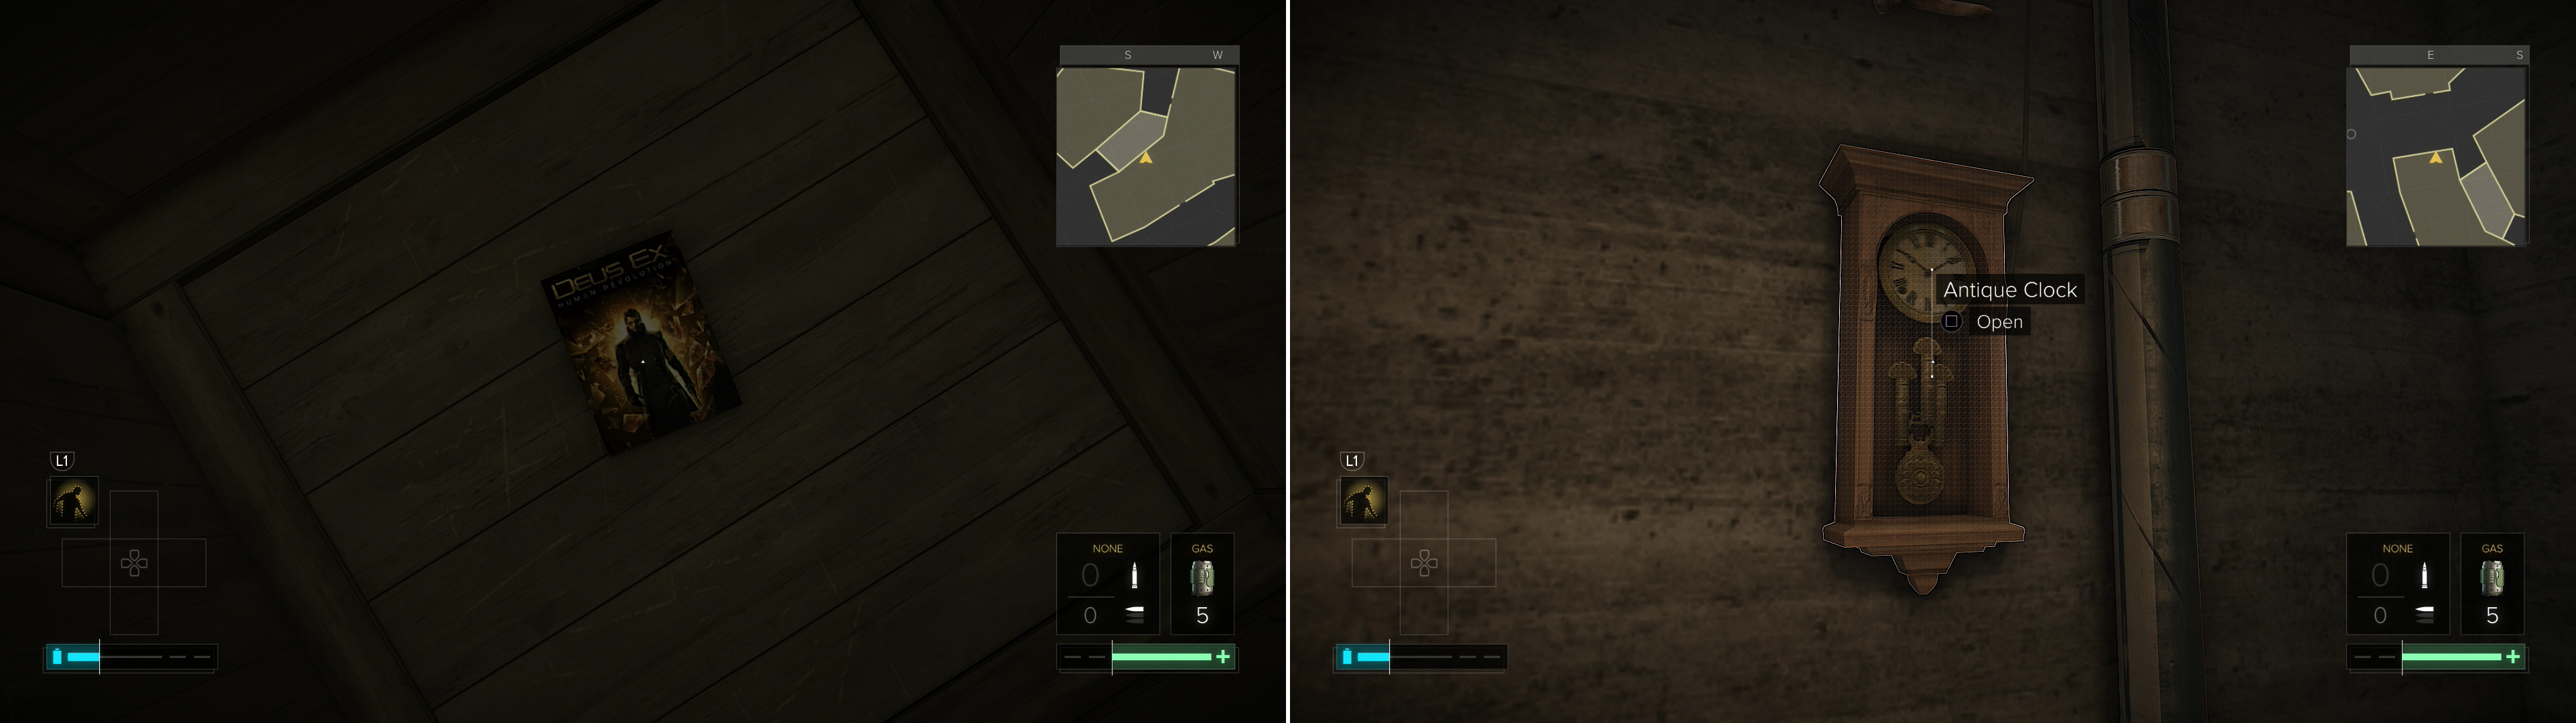 Find the Deus Ex: Human Revolution easter egg in the Future-Past Antiky shop! (left) In the same store, investigate an Antique Clock to open a secret passage (right).